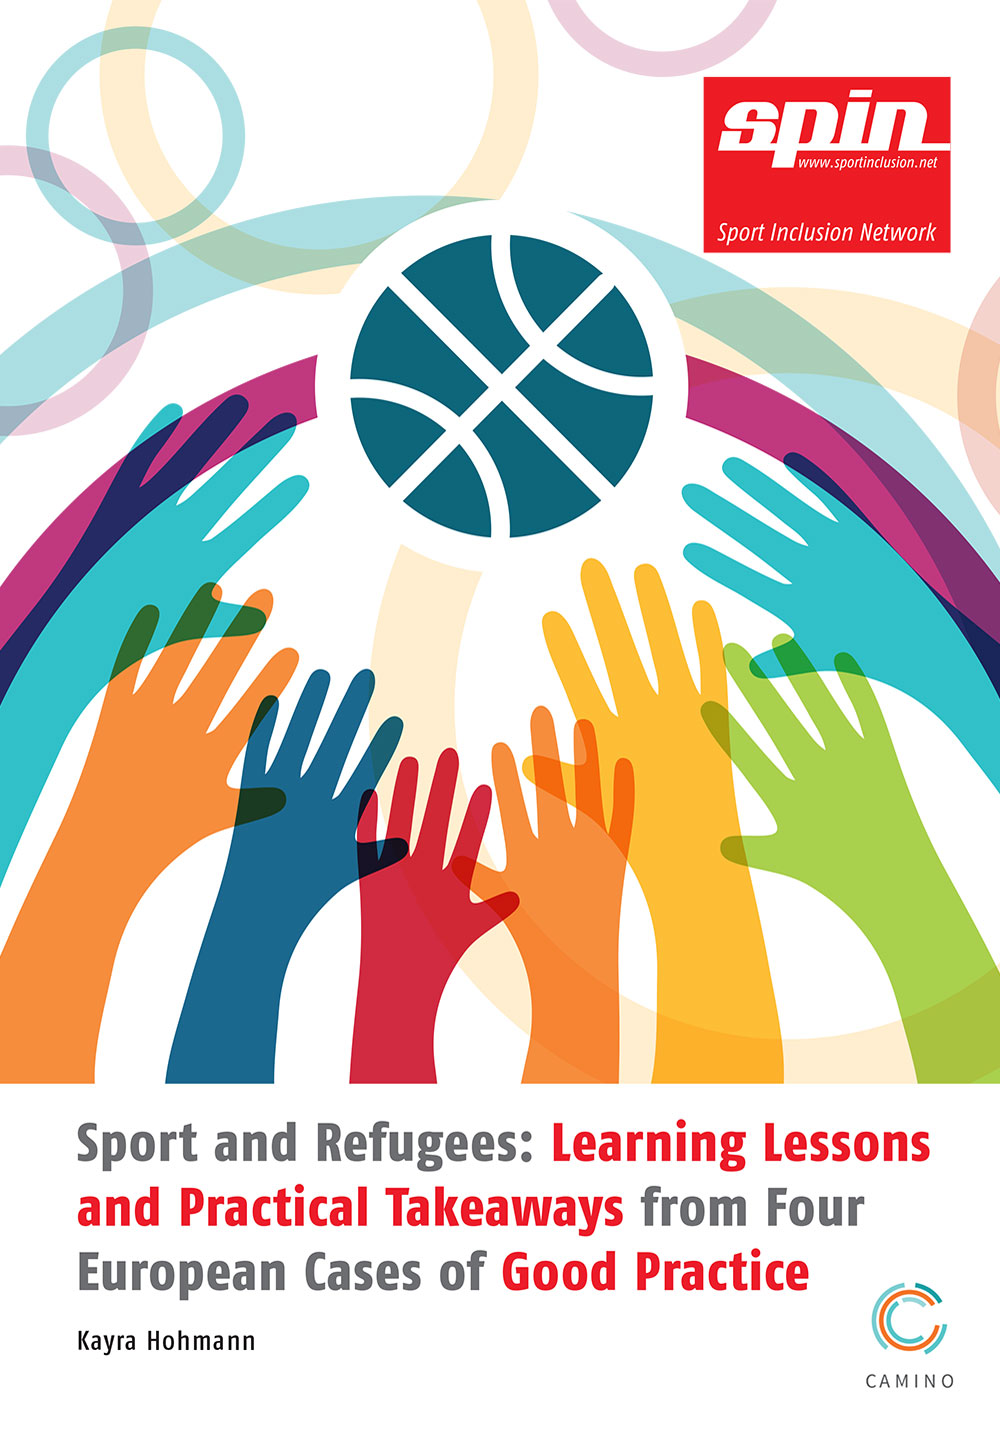 Sport and Refugees: Learning Lessons and Practical Takeaways from Four European Cases of Good Practice (2022)